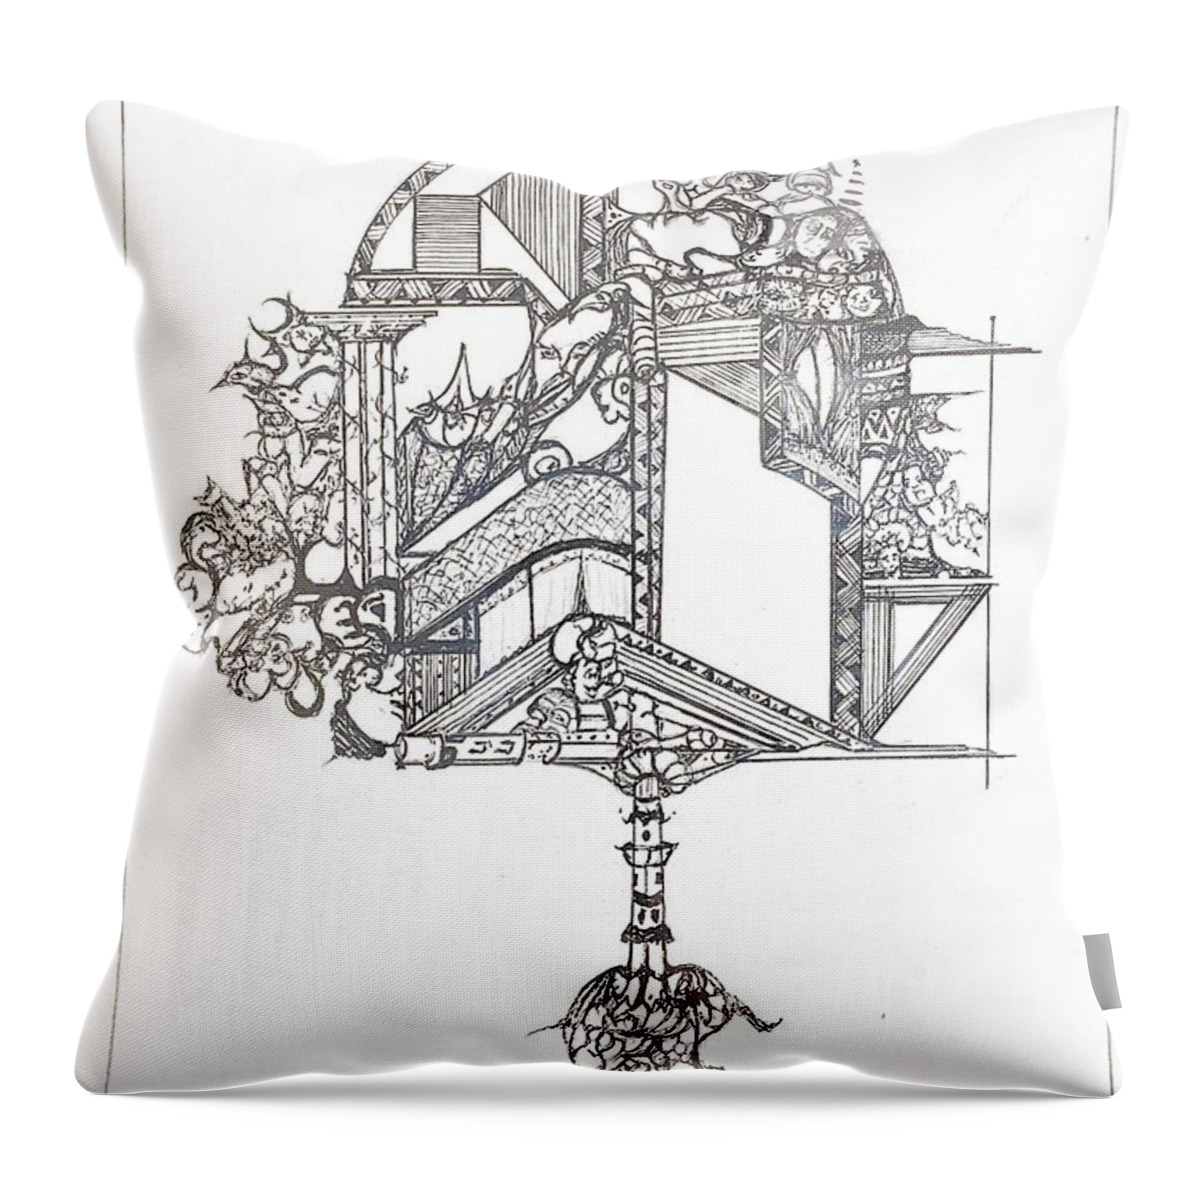  Throw Pillow featuring the drawing Pjc Soc #5 by Peter Colangelo